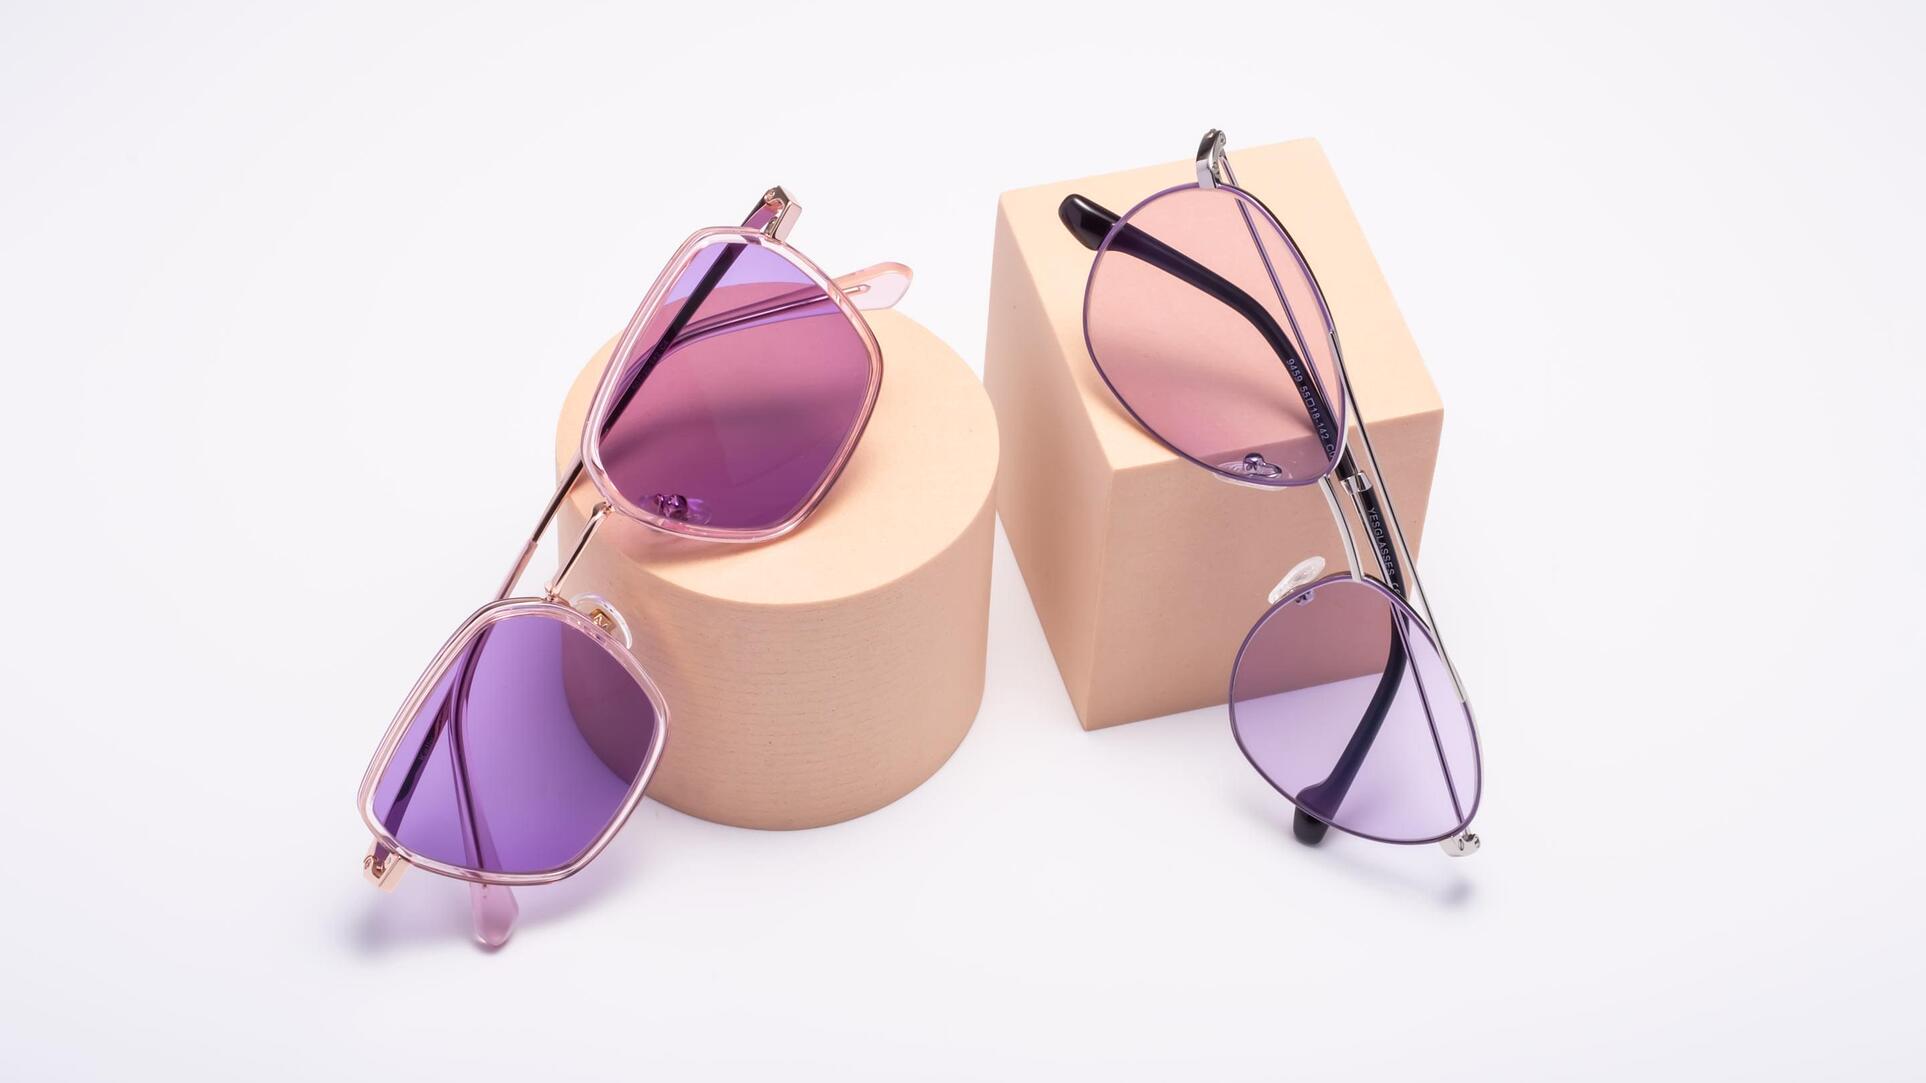 The color purple enhances contours of objects, improves color perception, and reduces glare